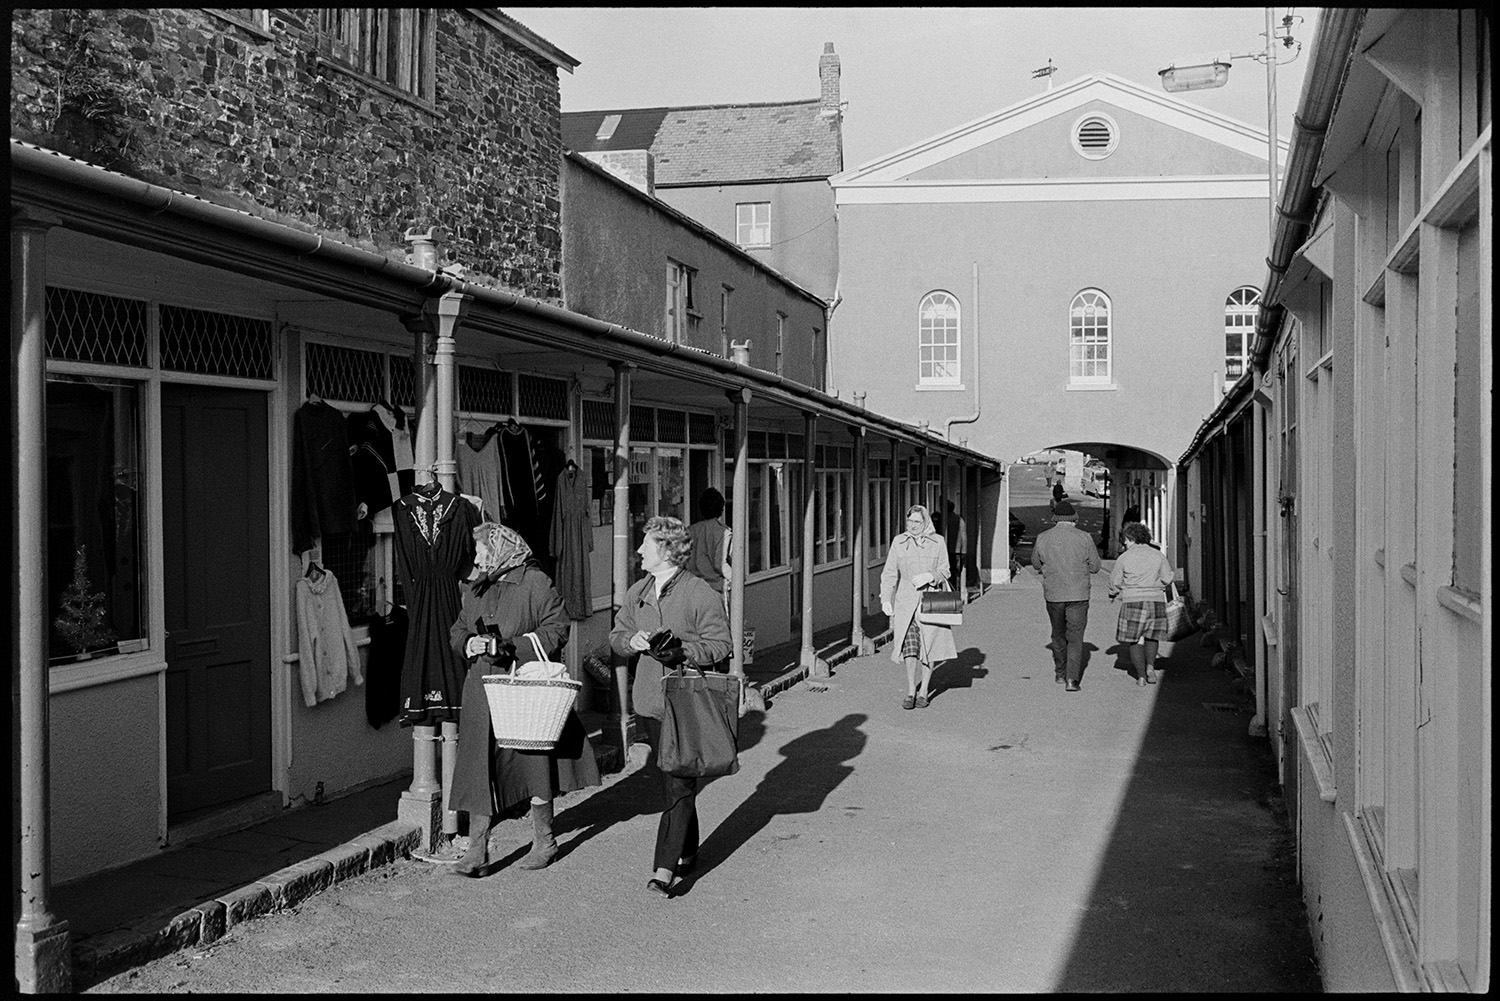 Street scenes with decaying front of antique shop, market.
[People shopping in Torrington Pannier Market. Two women are looking at clothes hung up outside one of the shop fronts.]